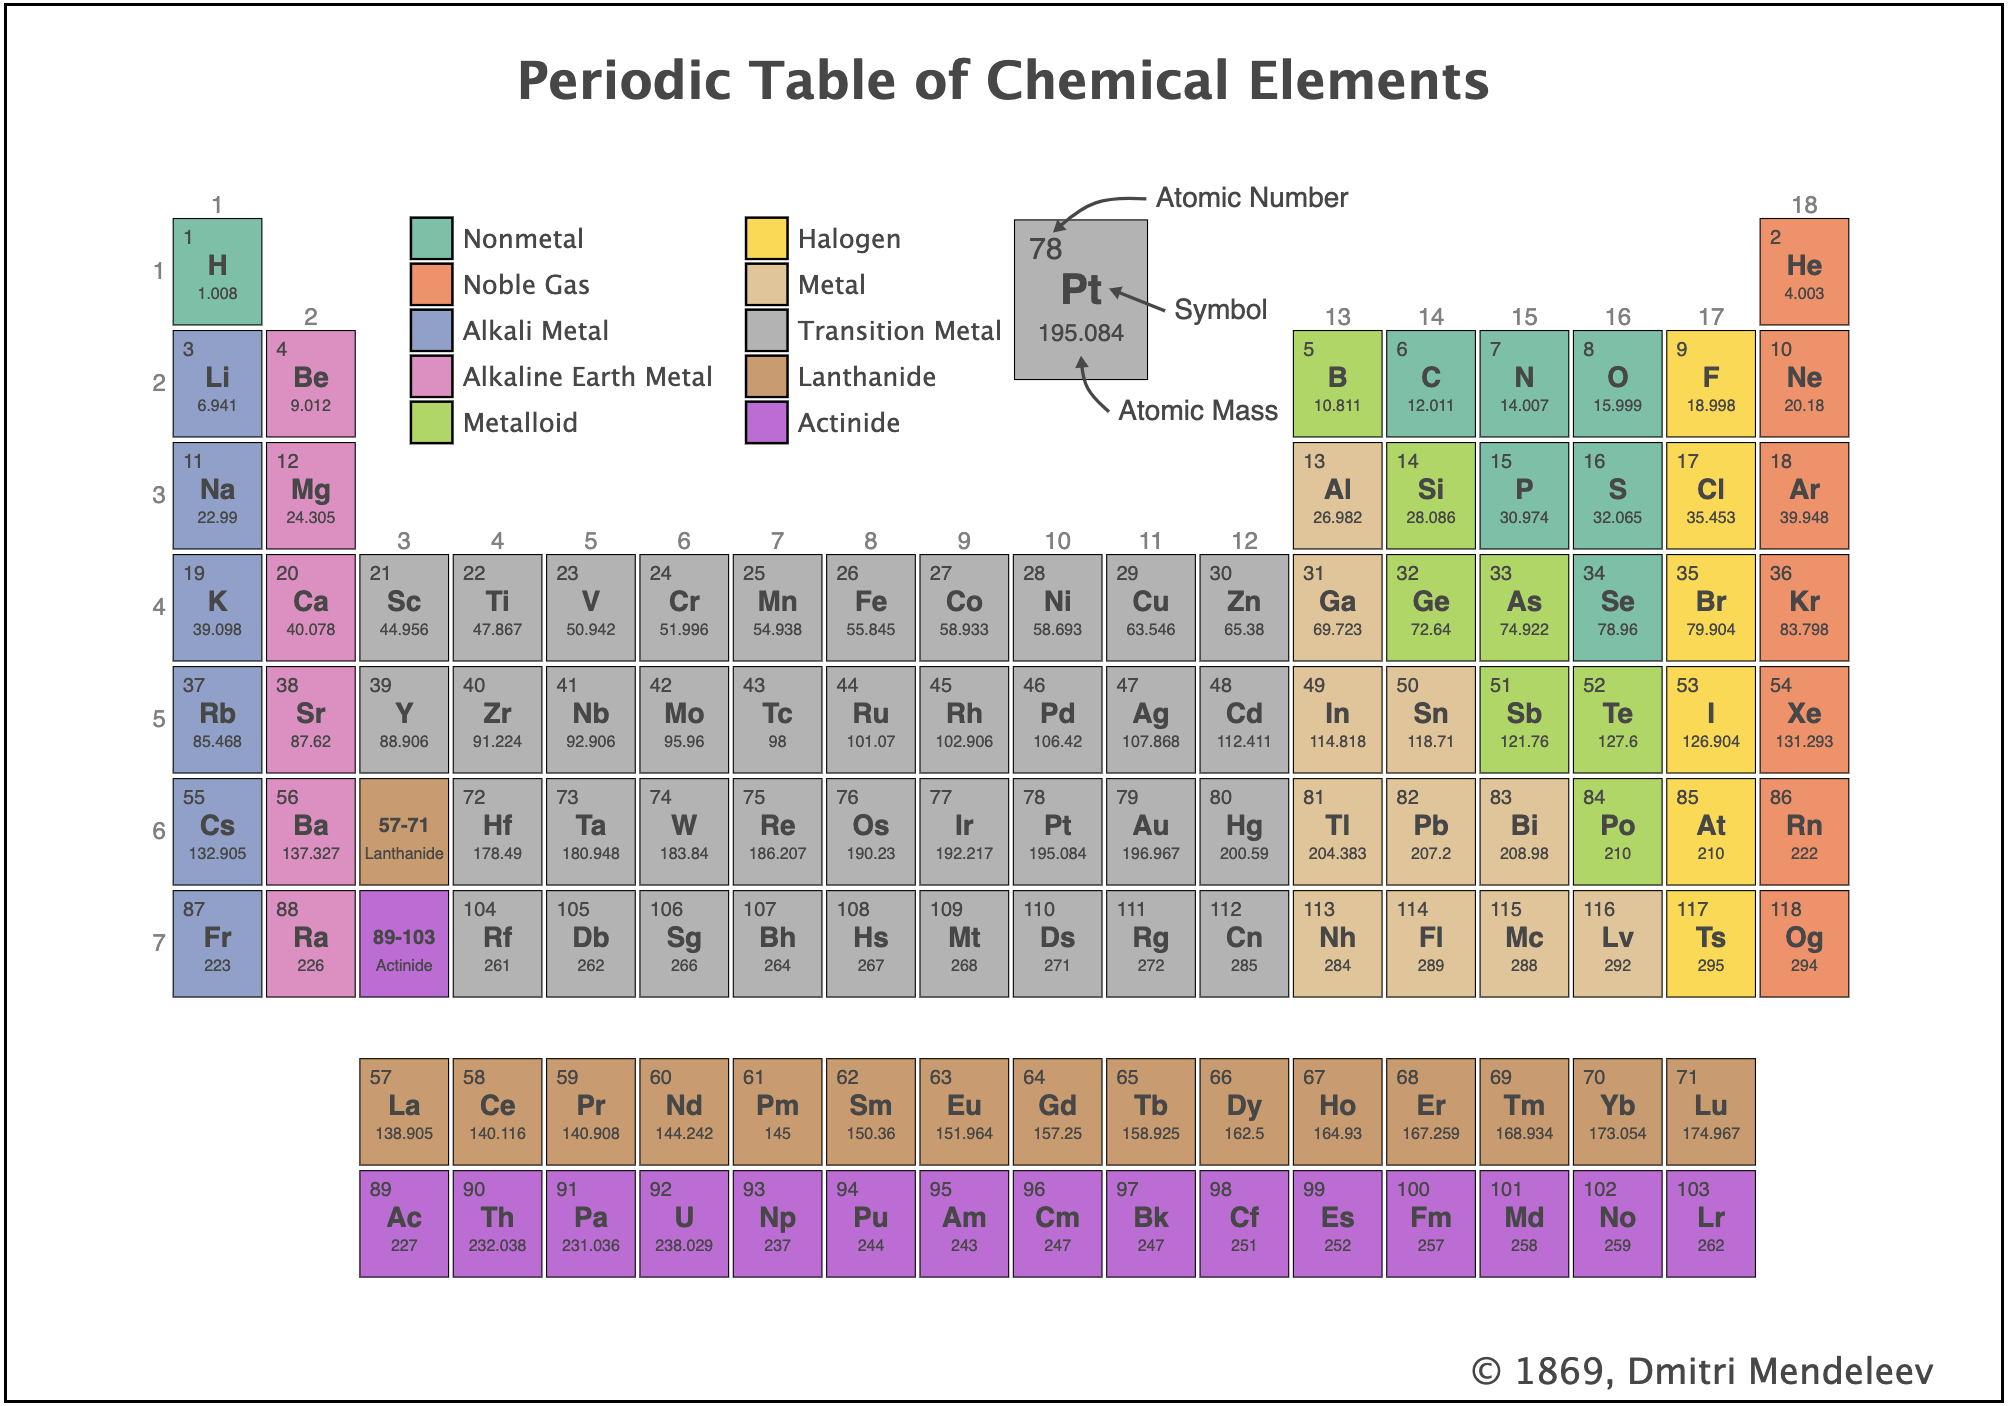 f-24a/images/gal_periodic_table.png